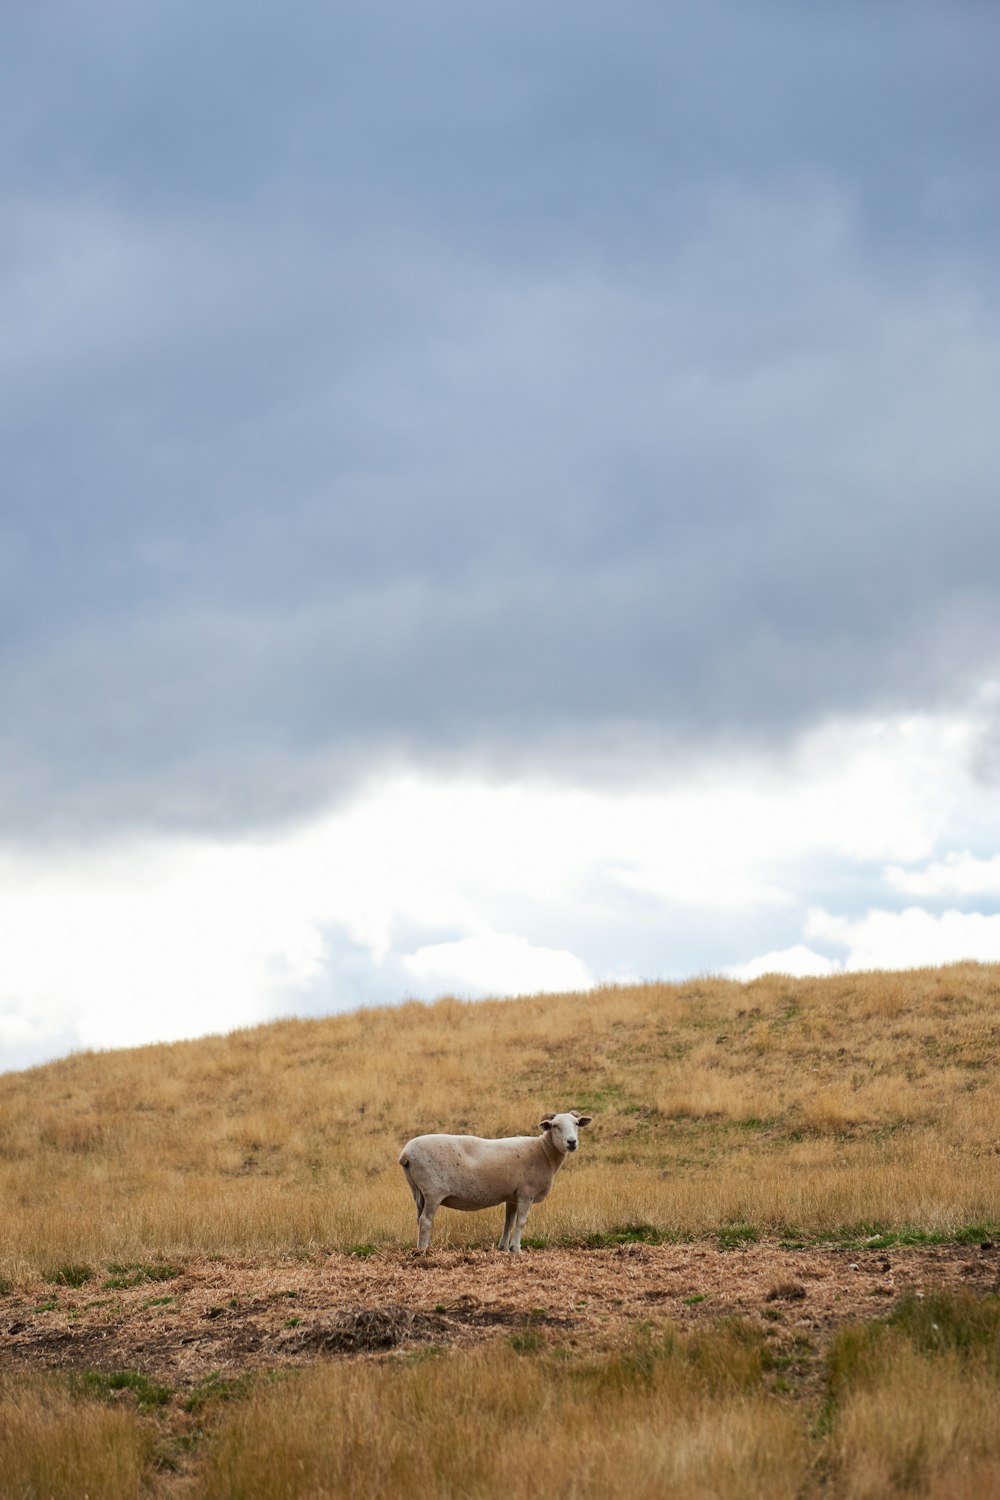 white horse on brown grass field under white clouds during daytime